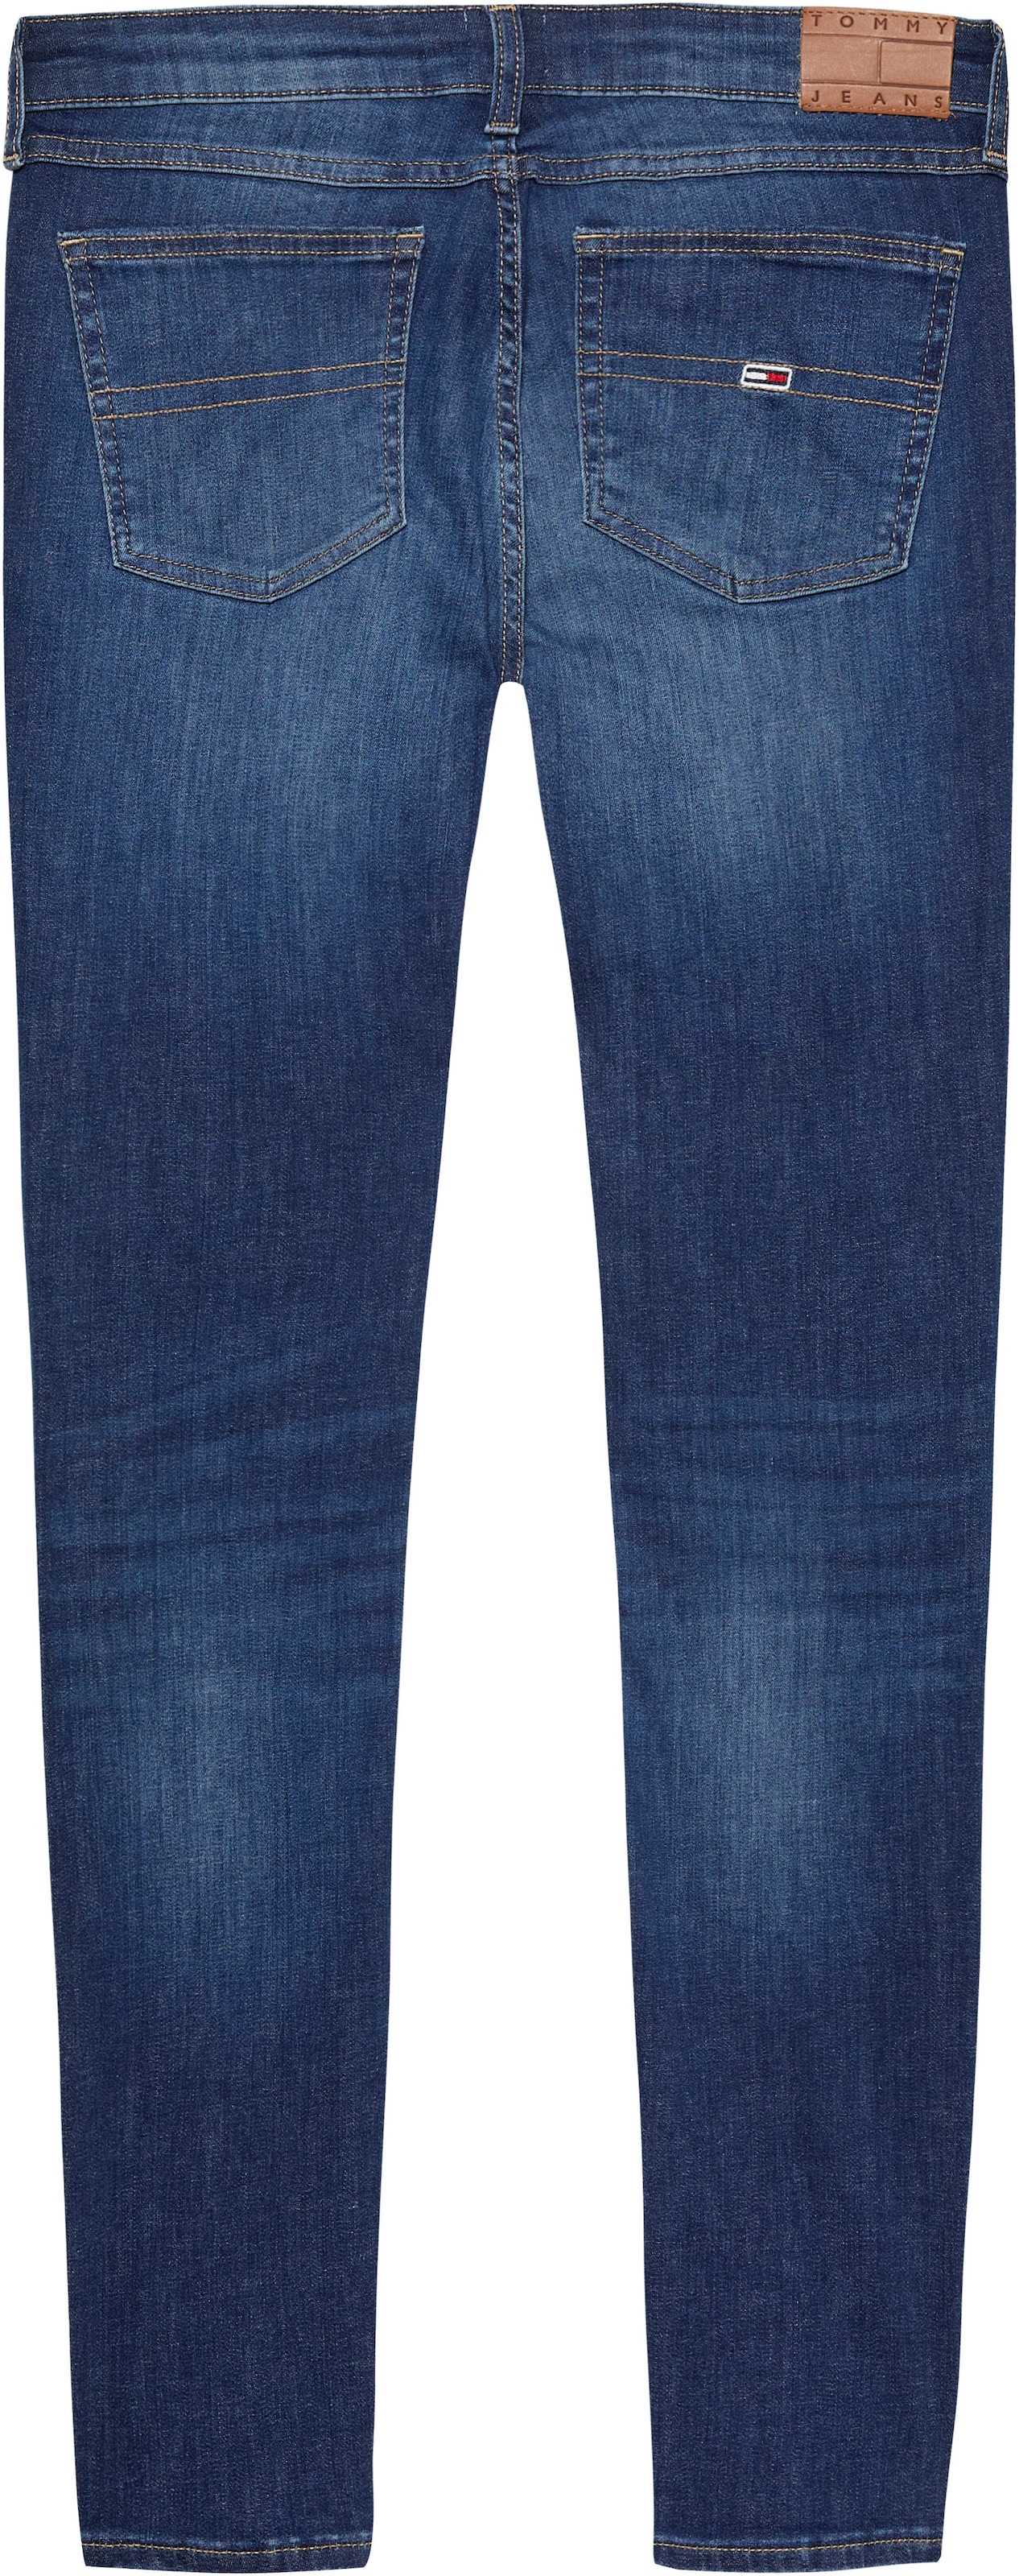 Tommy Jeans Skinny-fit-Jeans »Tommy Jeans Damenjeans Low Waist Skinny«, mit Faded-out Effekt, washed out, Tommy Jeans Logo-Badge